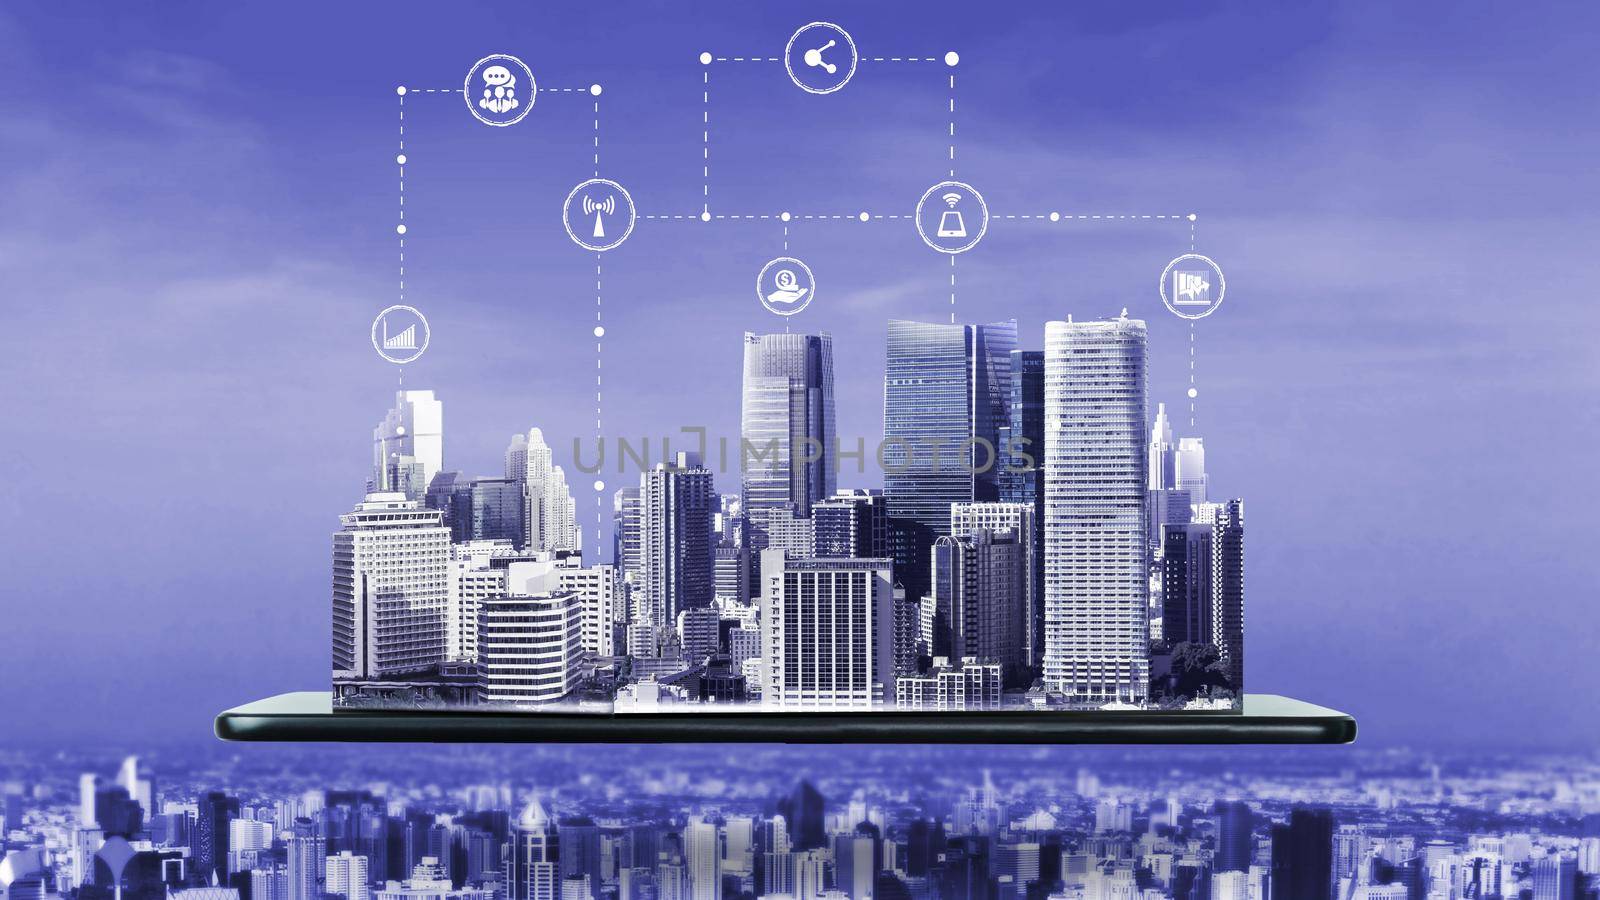 The modern creative communication and internet network connect in smart city by biancoblue